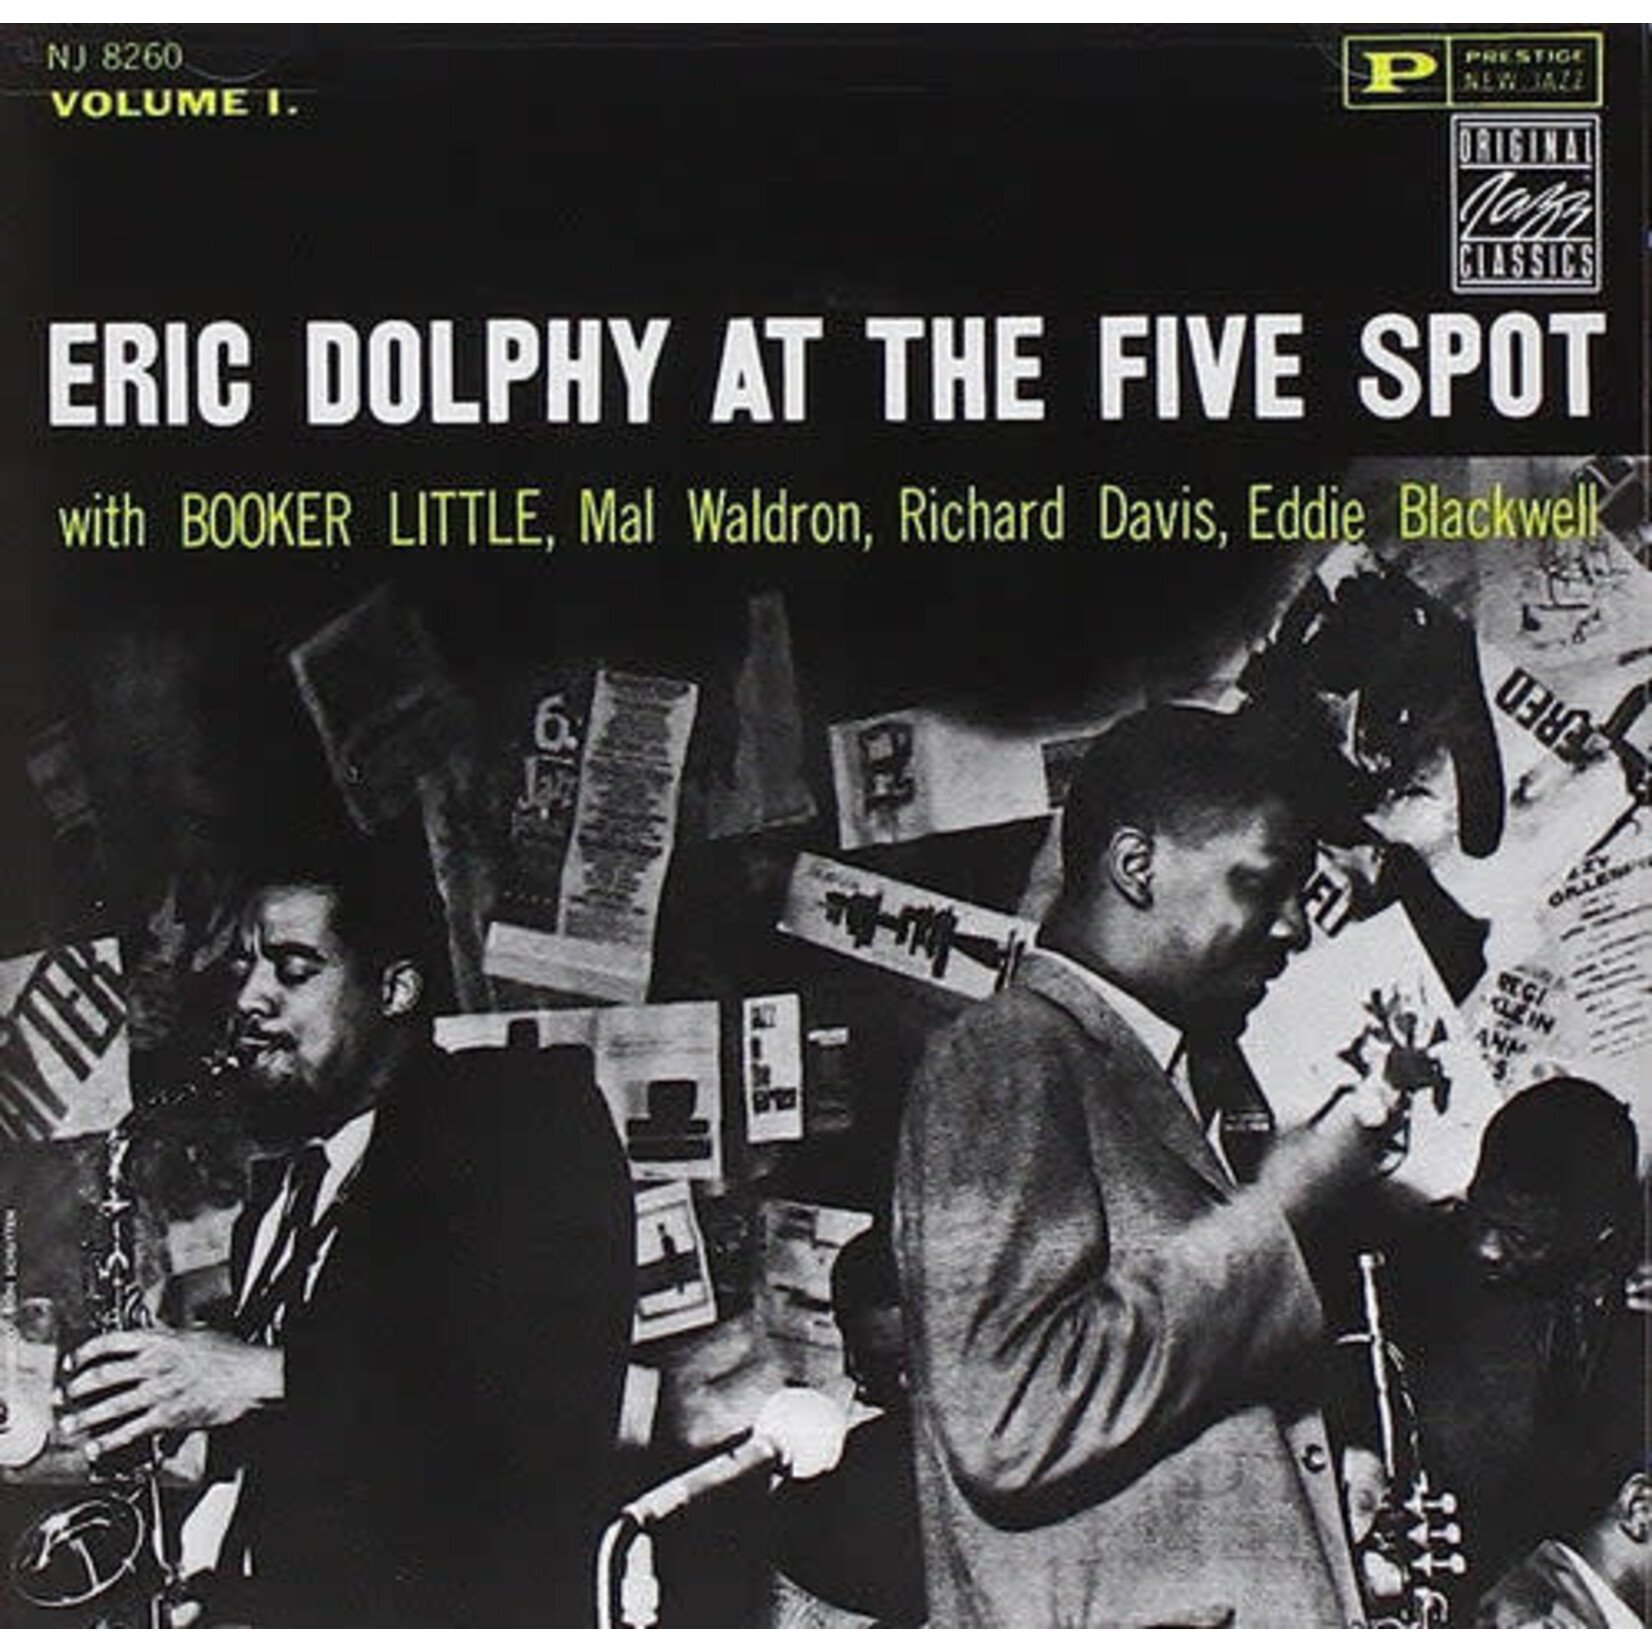 [New] Eric Dolphy - At The Five Spot, Volume 1 (clear vinyl)